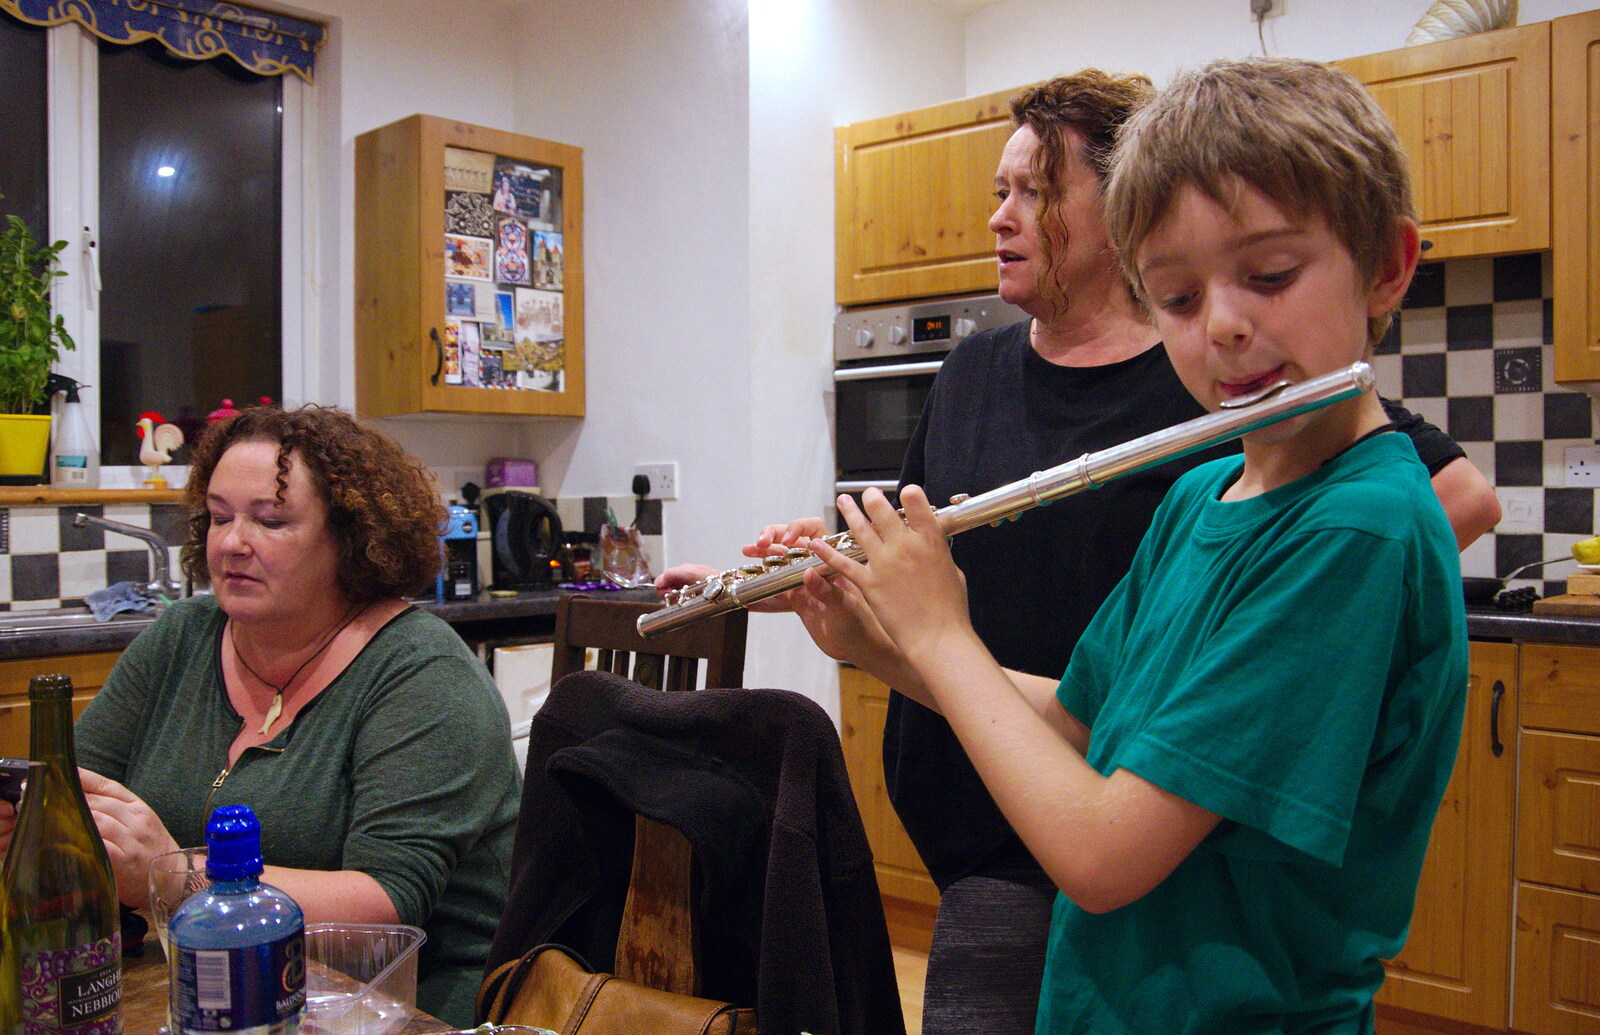 Fred plays flute in the kitchen from The Summer Trip to Ireland, Monkstown, Co. Dublin, Ireland - 9th August 2019